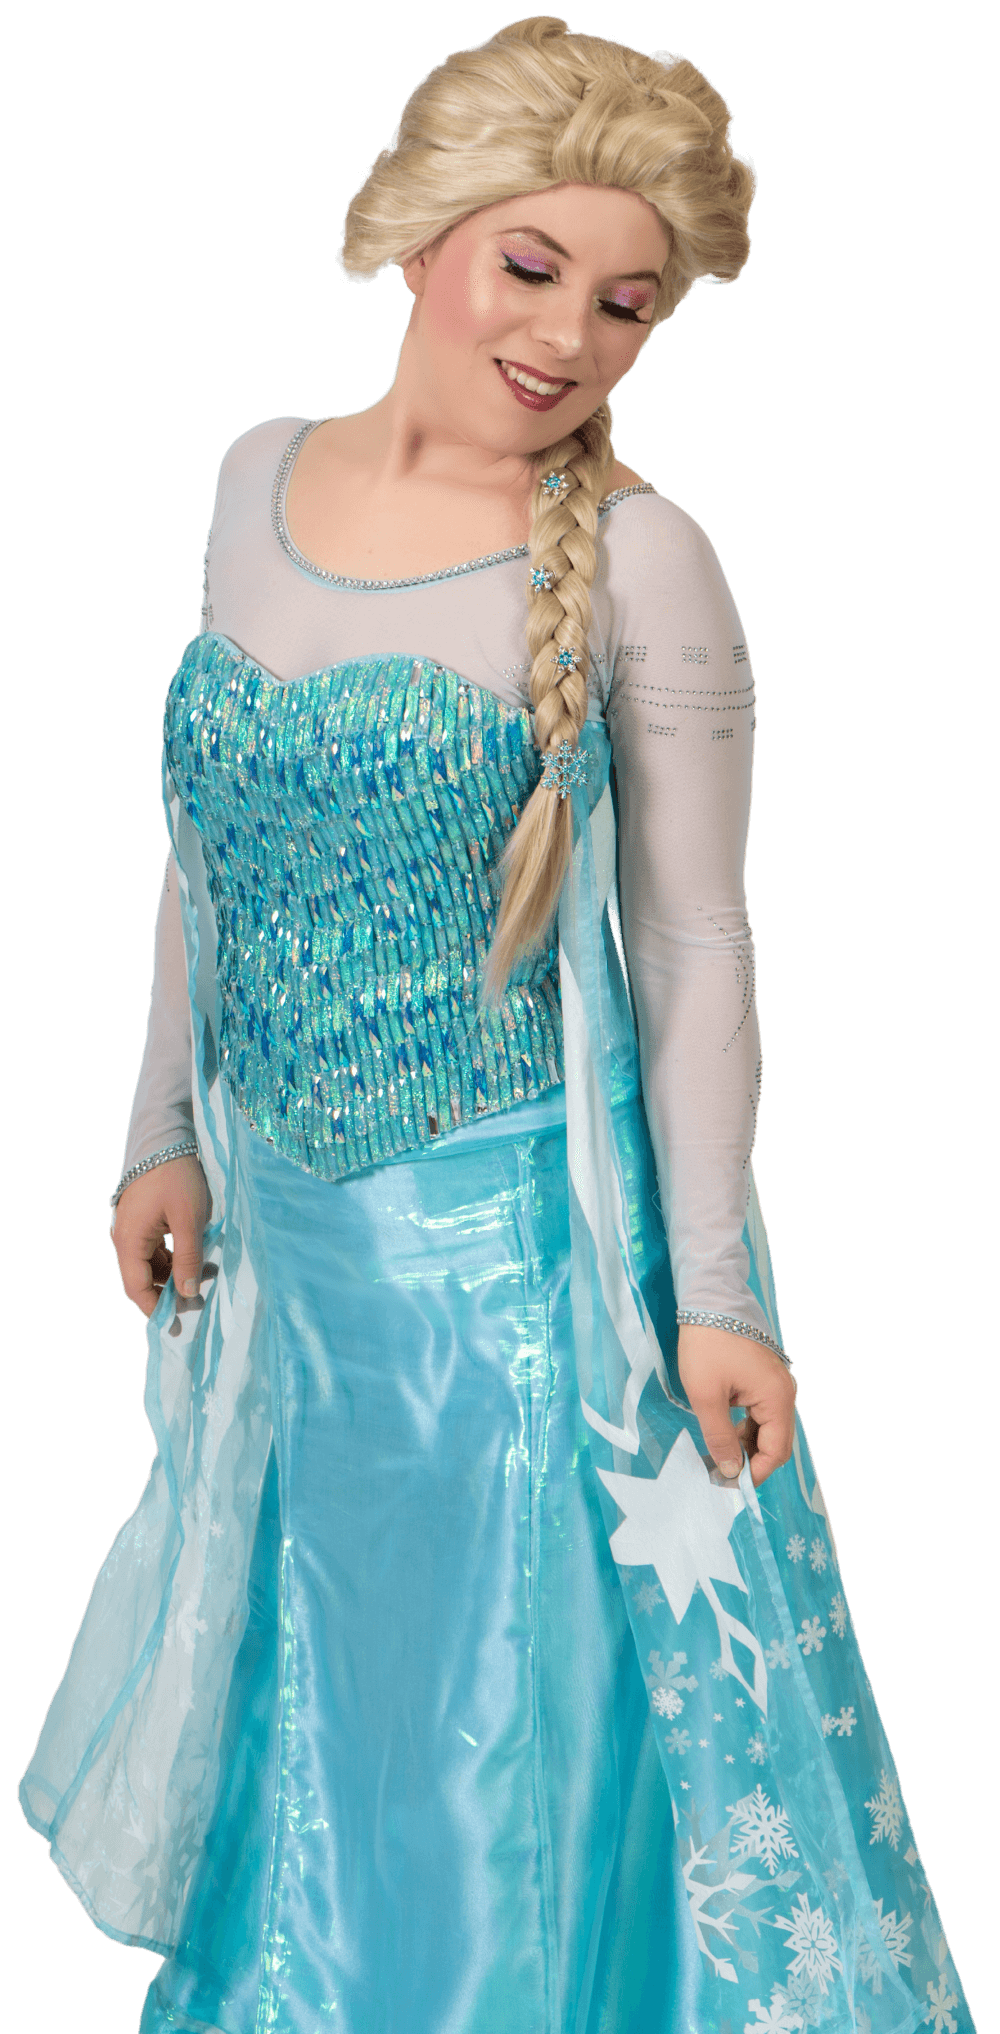 Snow Queen Characters and Themed Princess Party